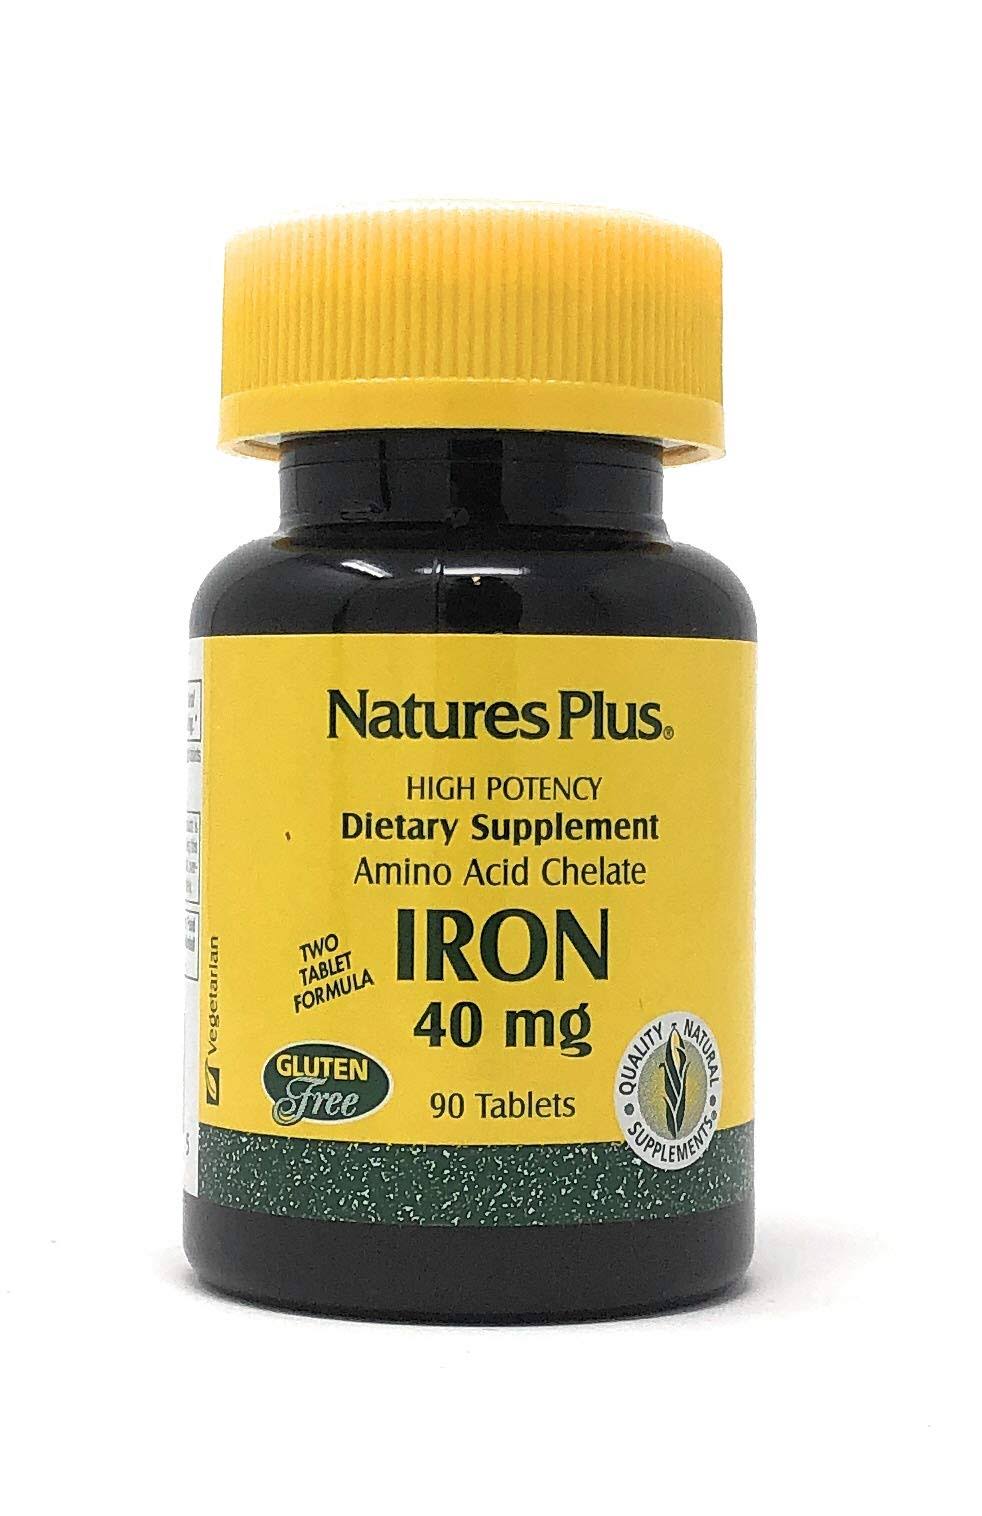 Natures Plus Iron Supplement - 40 mg, 90 Tablets